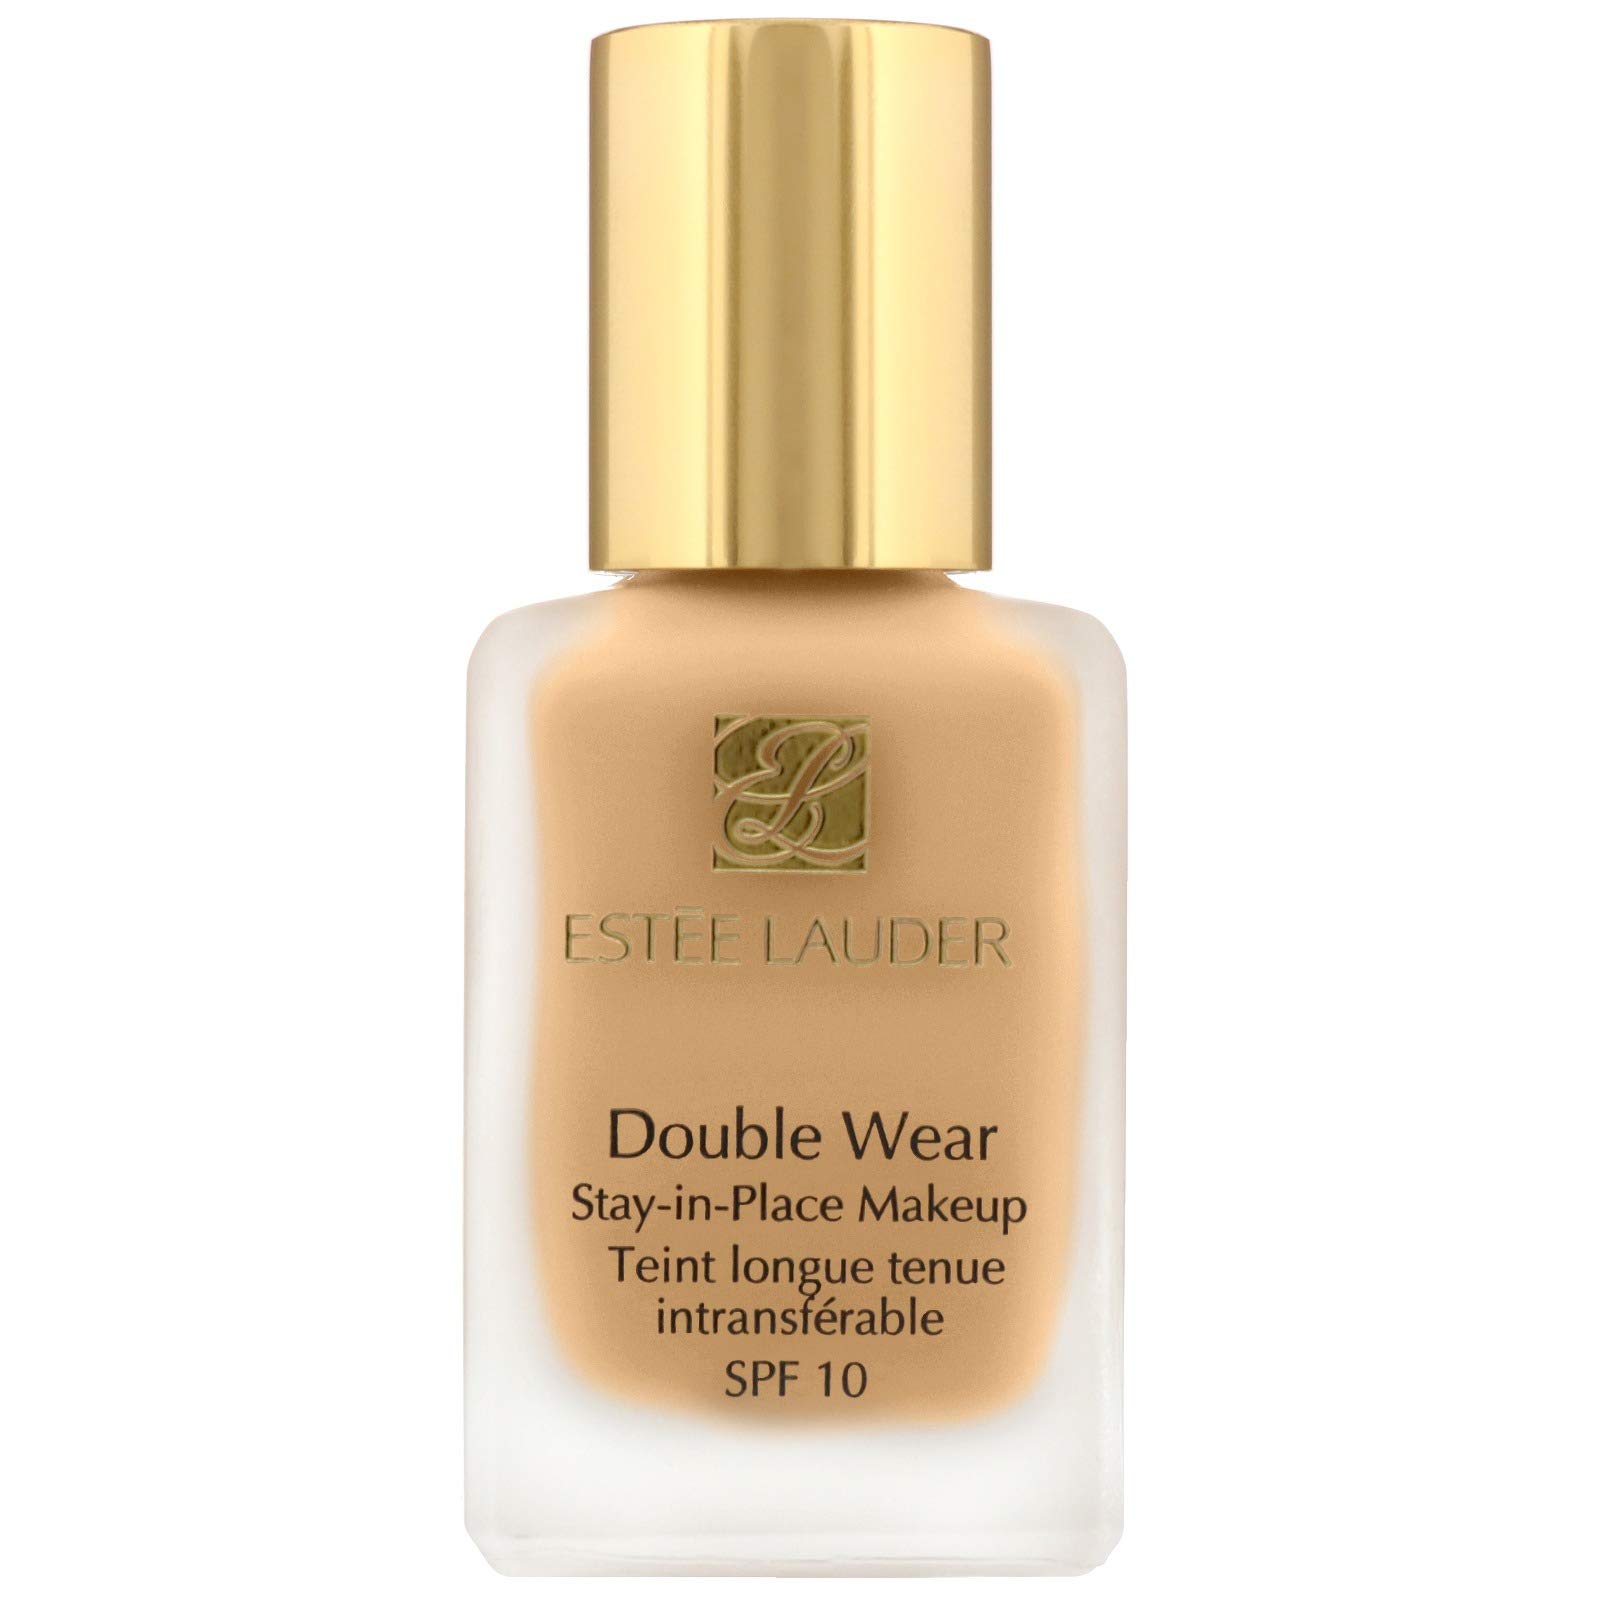 Estee Lauder Double Wear Stay-in-Place Makeup Foundation, No. 2n2 Buff